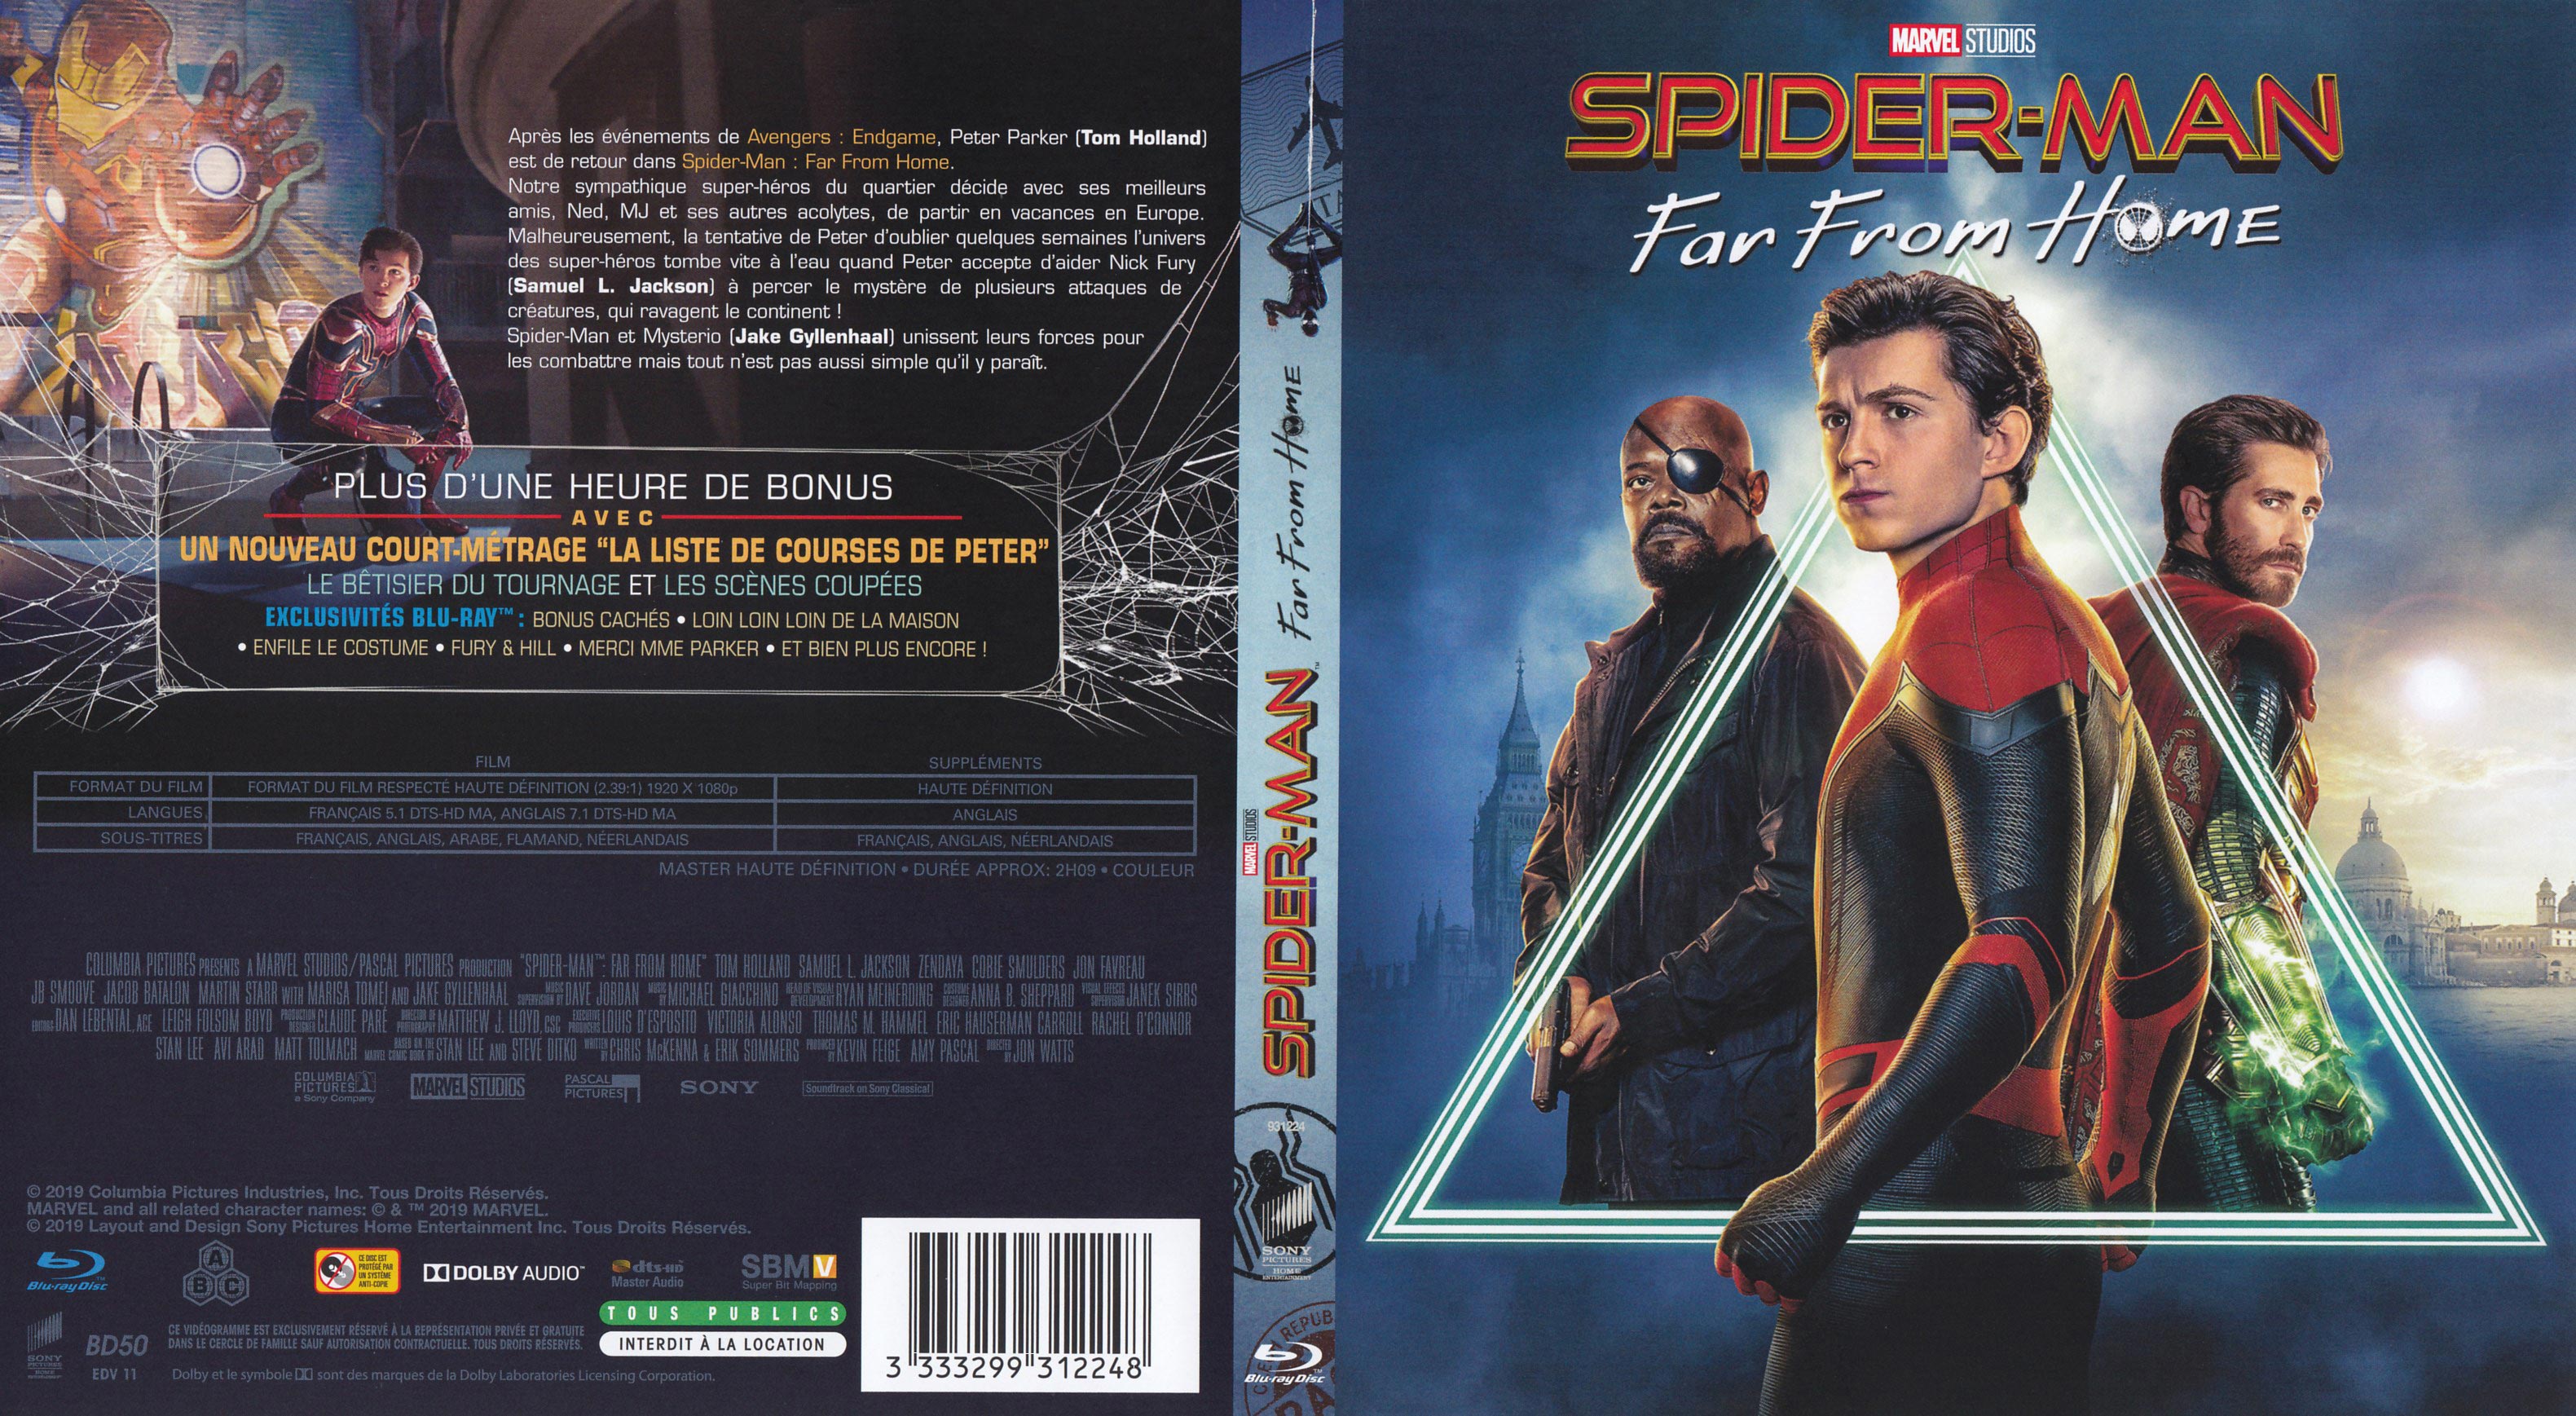 Jaquette DVD Spider-man Far from home (BLU-RAY)